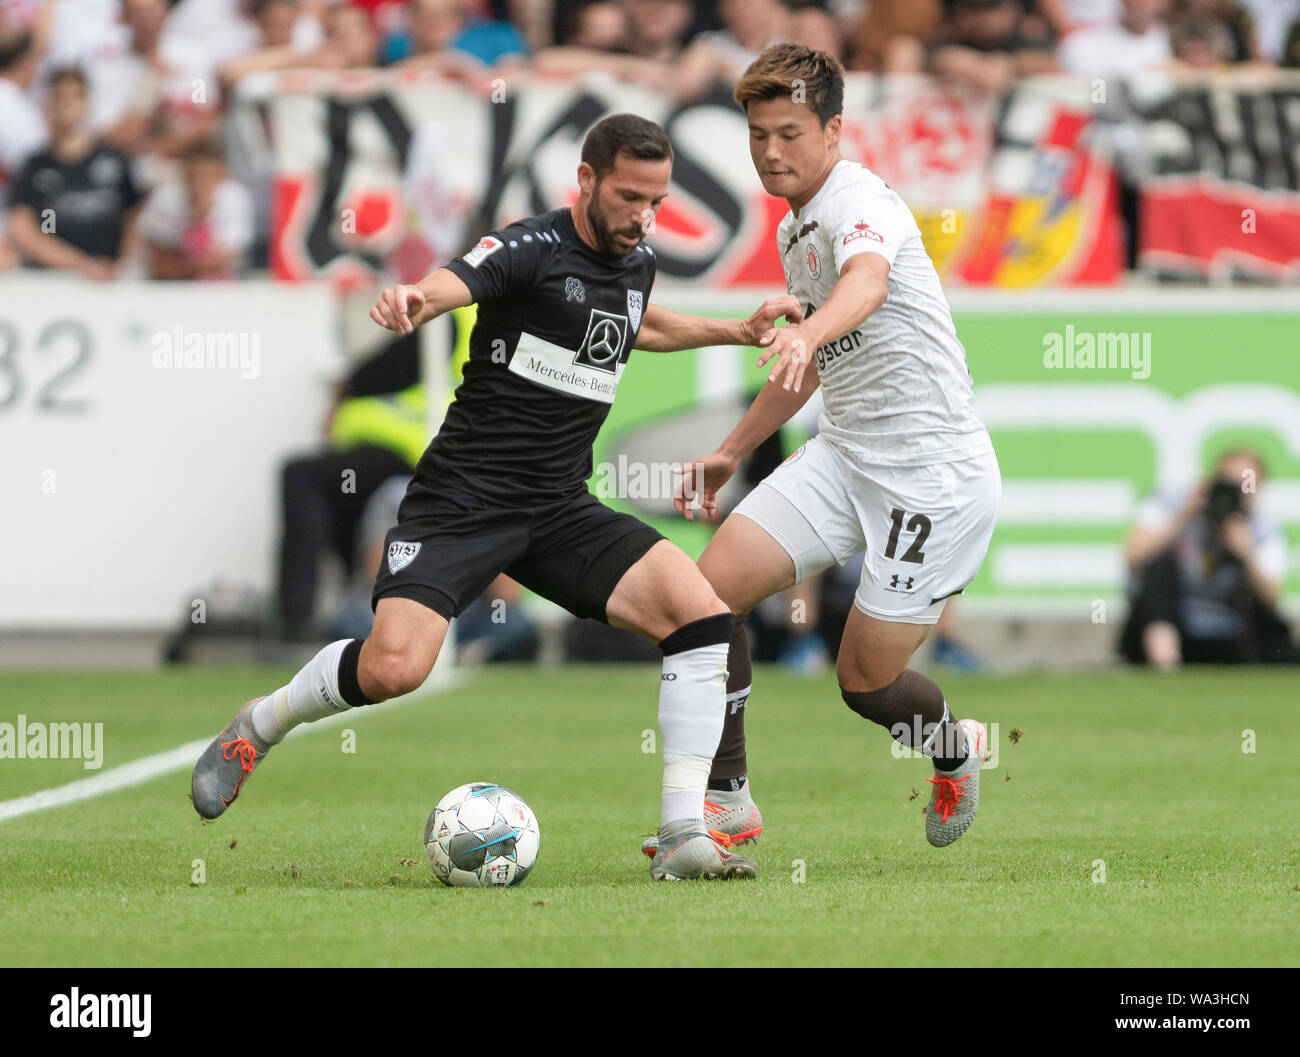 Stuttgart, Germany. 17th Aug, 2019. Soccer: 2nd Bundesliga, VfB Stuttgart - FC St. Pauli, 3rd matchday. Stuttgart's Gonzalo Castro (l) plays the ball in front of St. Paulis Ryo Miyaichi. Credit: Daniel Maurer/dpa - IMPORTANT NOTE: In accordance with the requirements of the DFL Deutsche Fußball Liga or the DFB Deutscher Fußball-Bund, it is prohibited to use or have used photographs taken in the stadium and/or the match in the form of sequence images and/or video-like photo sequences./dpa/Alamy Live News Stock Photo